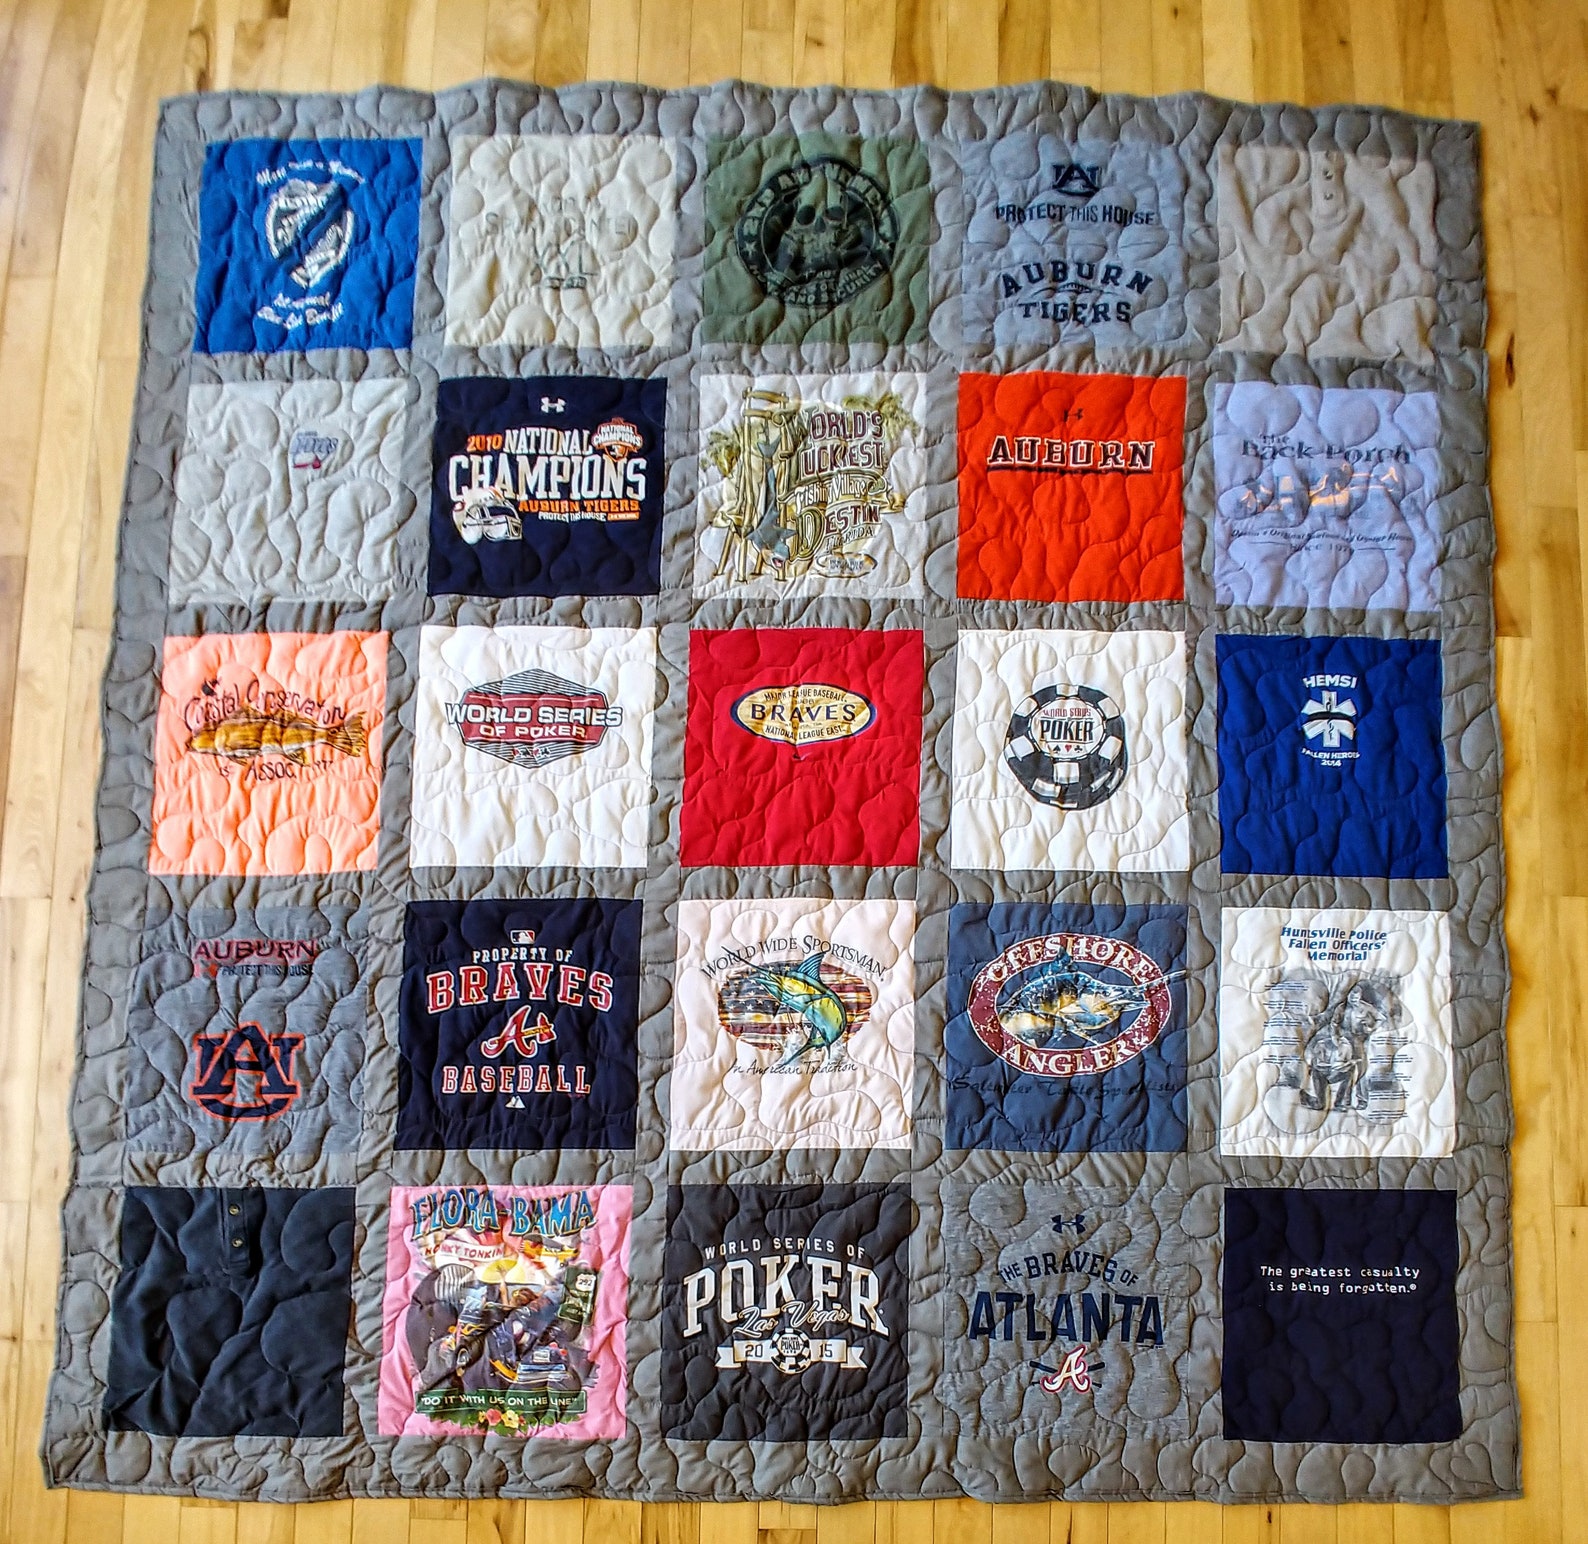 25 T-shirt Memory Quilt With Sashing FREE SHIPPING - Etsy